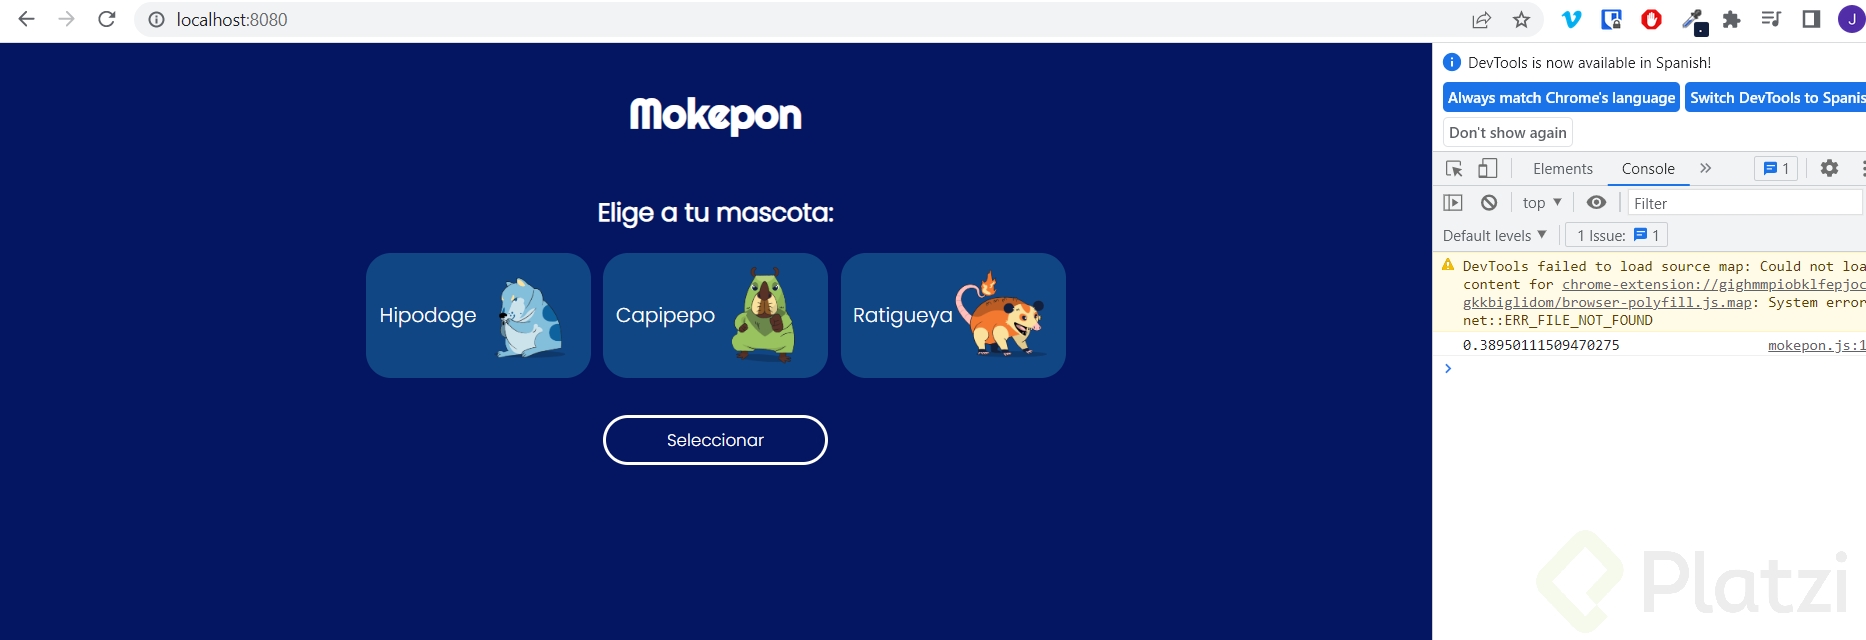 mokepon-online.png